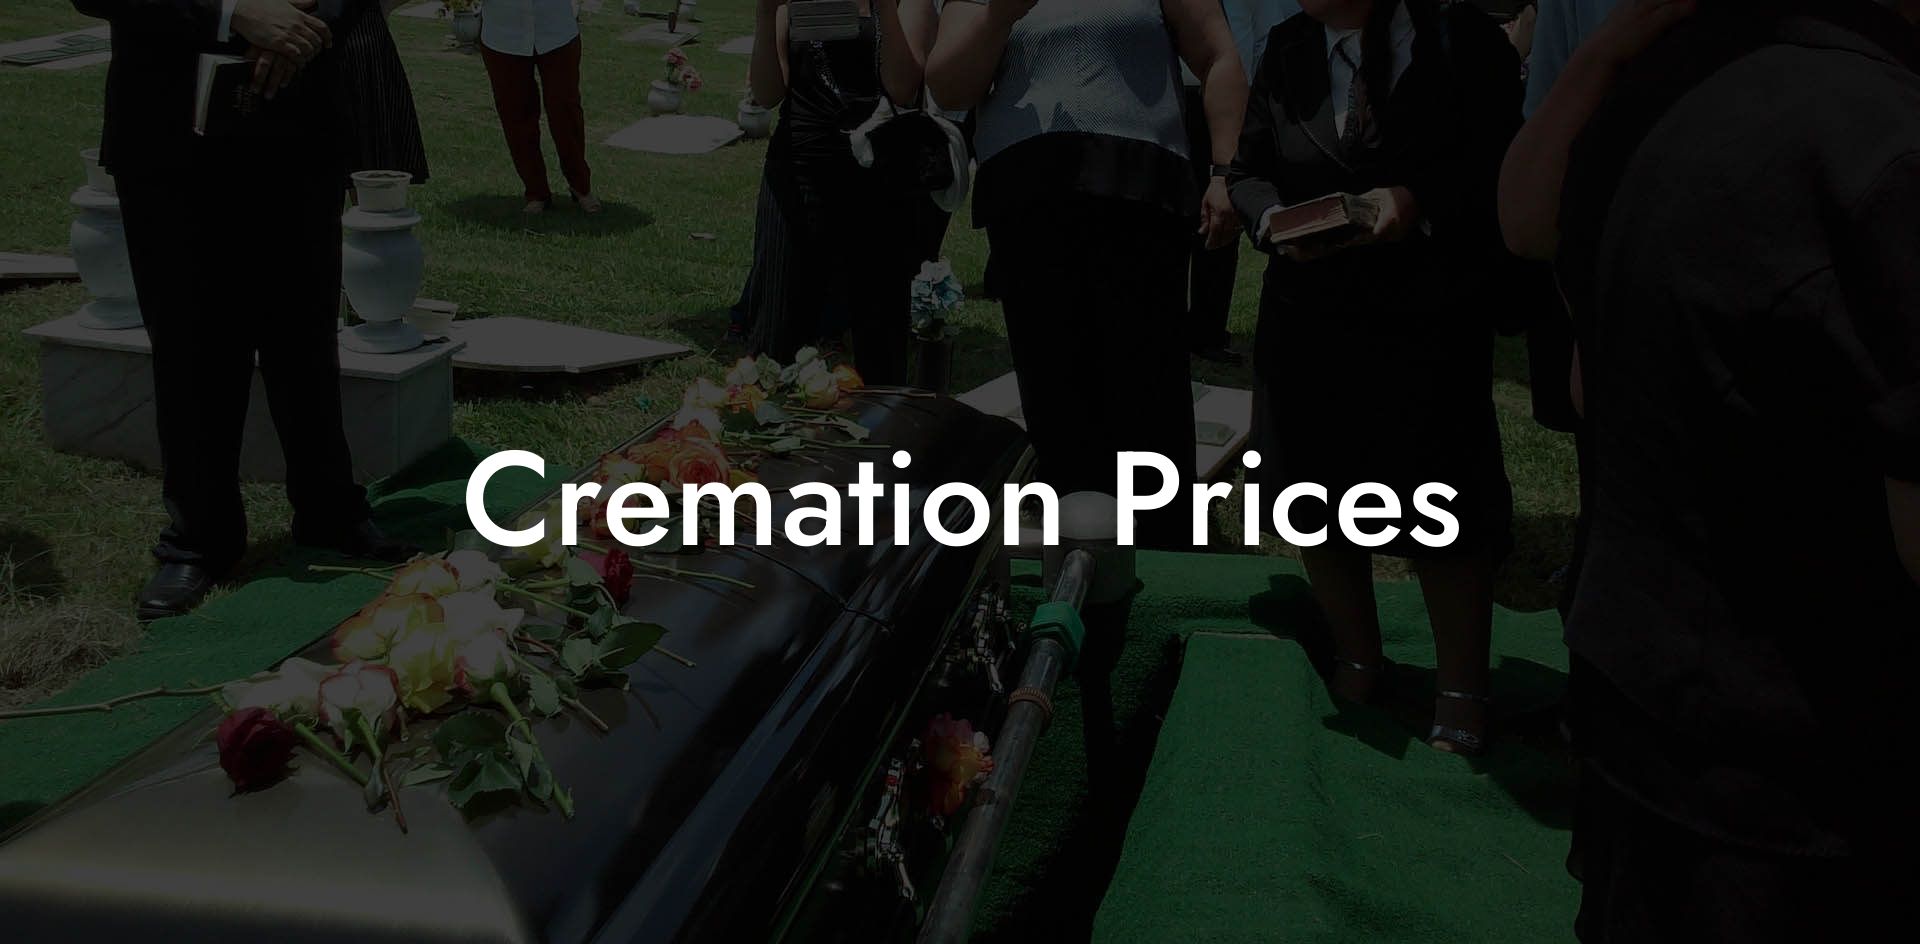 Cremation Prices